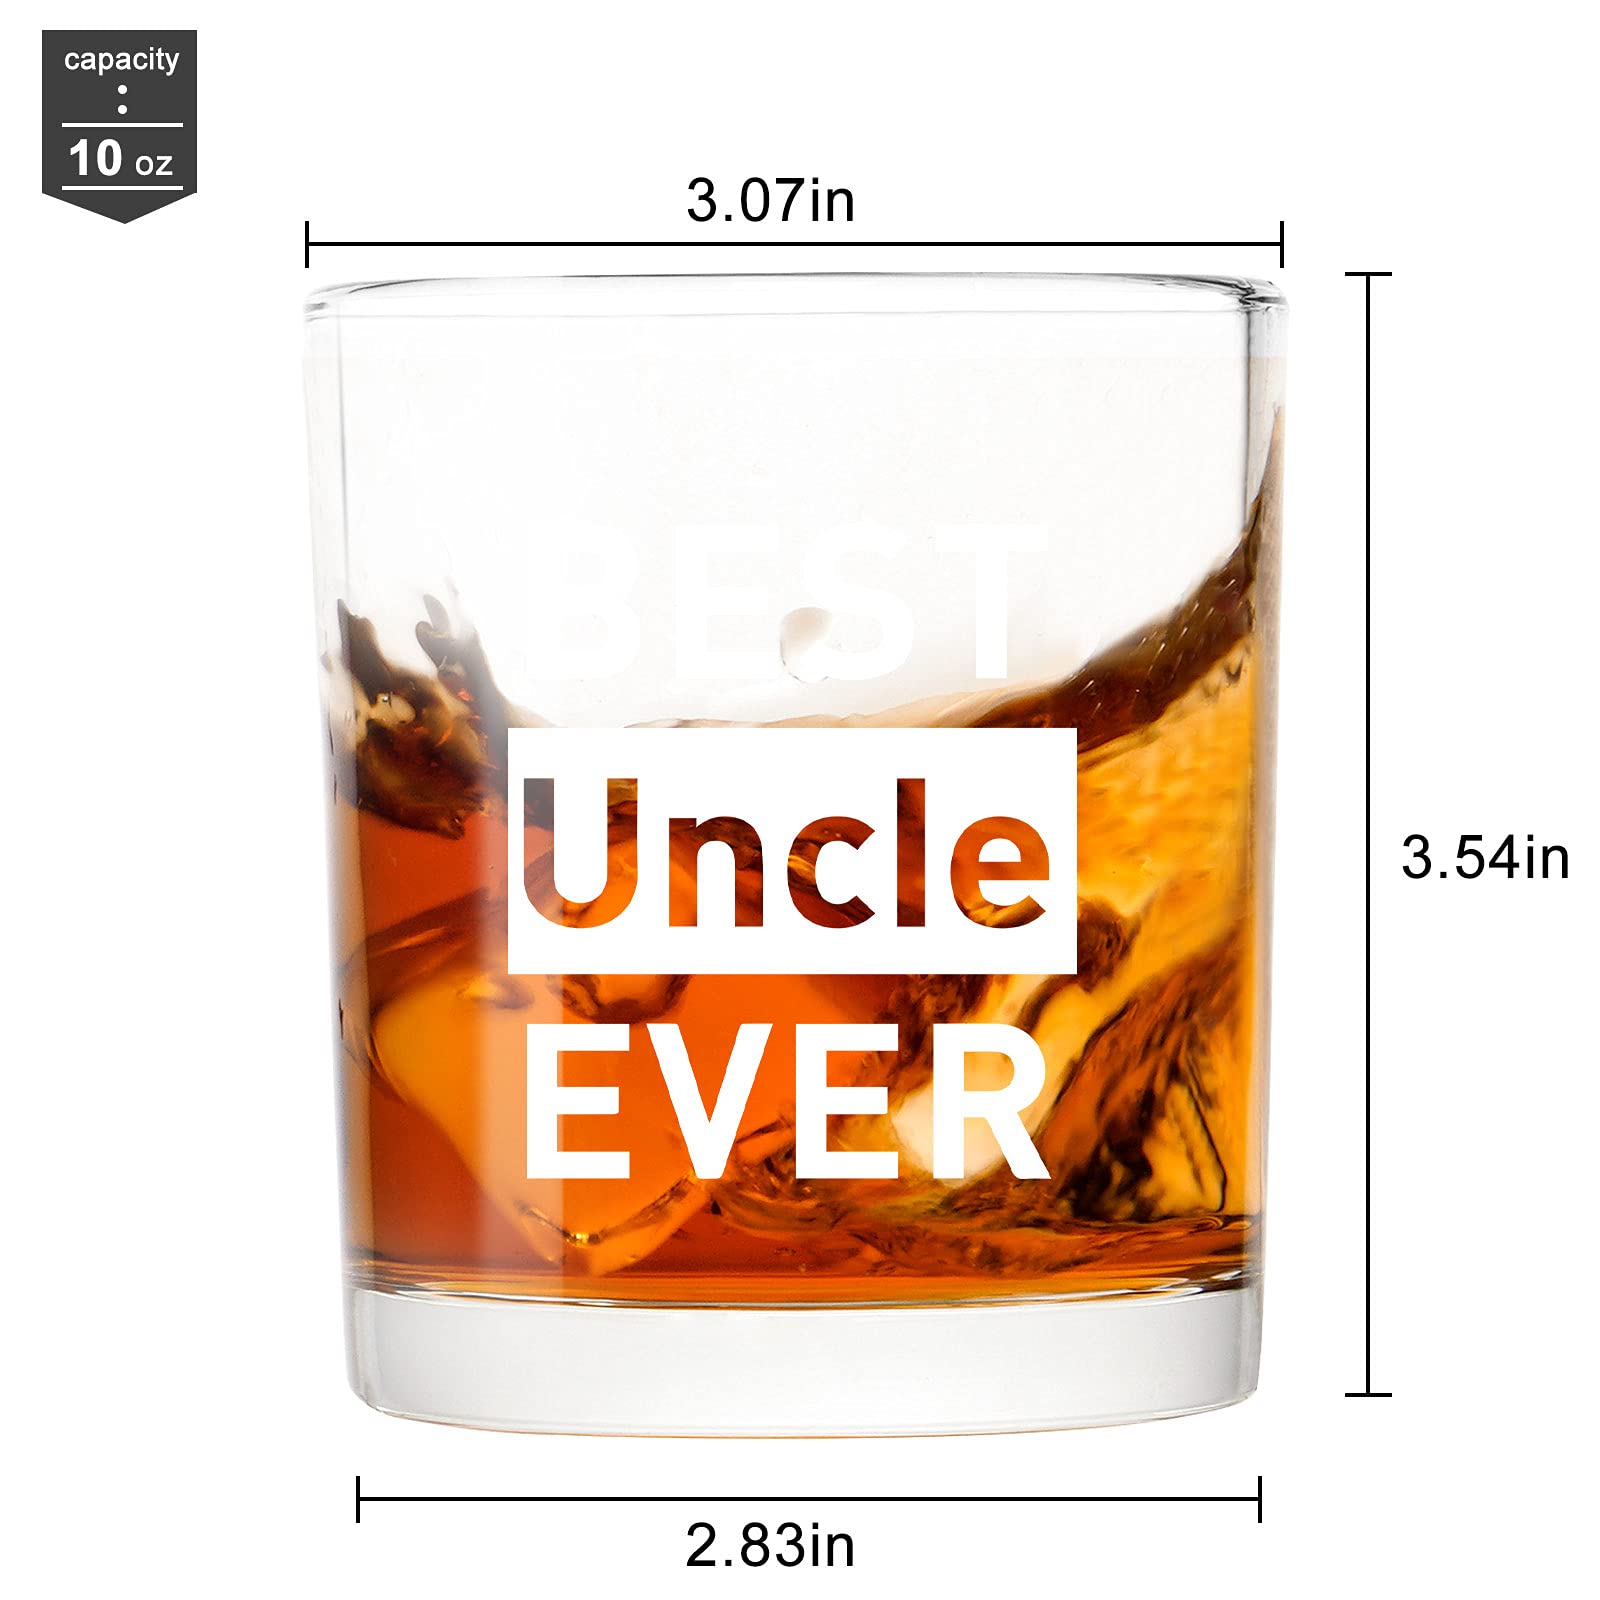 Best Uncle Ever Whiskey Glass, Funny Dad Gift for Him Uncle Dad Grandfather Husband, Special Uncle Rock Glass for Father’s Day Birthday Christmas Retirement, 10 Oz